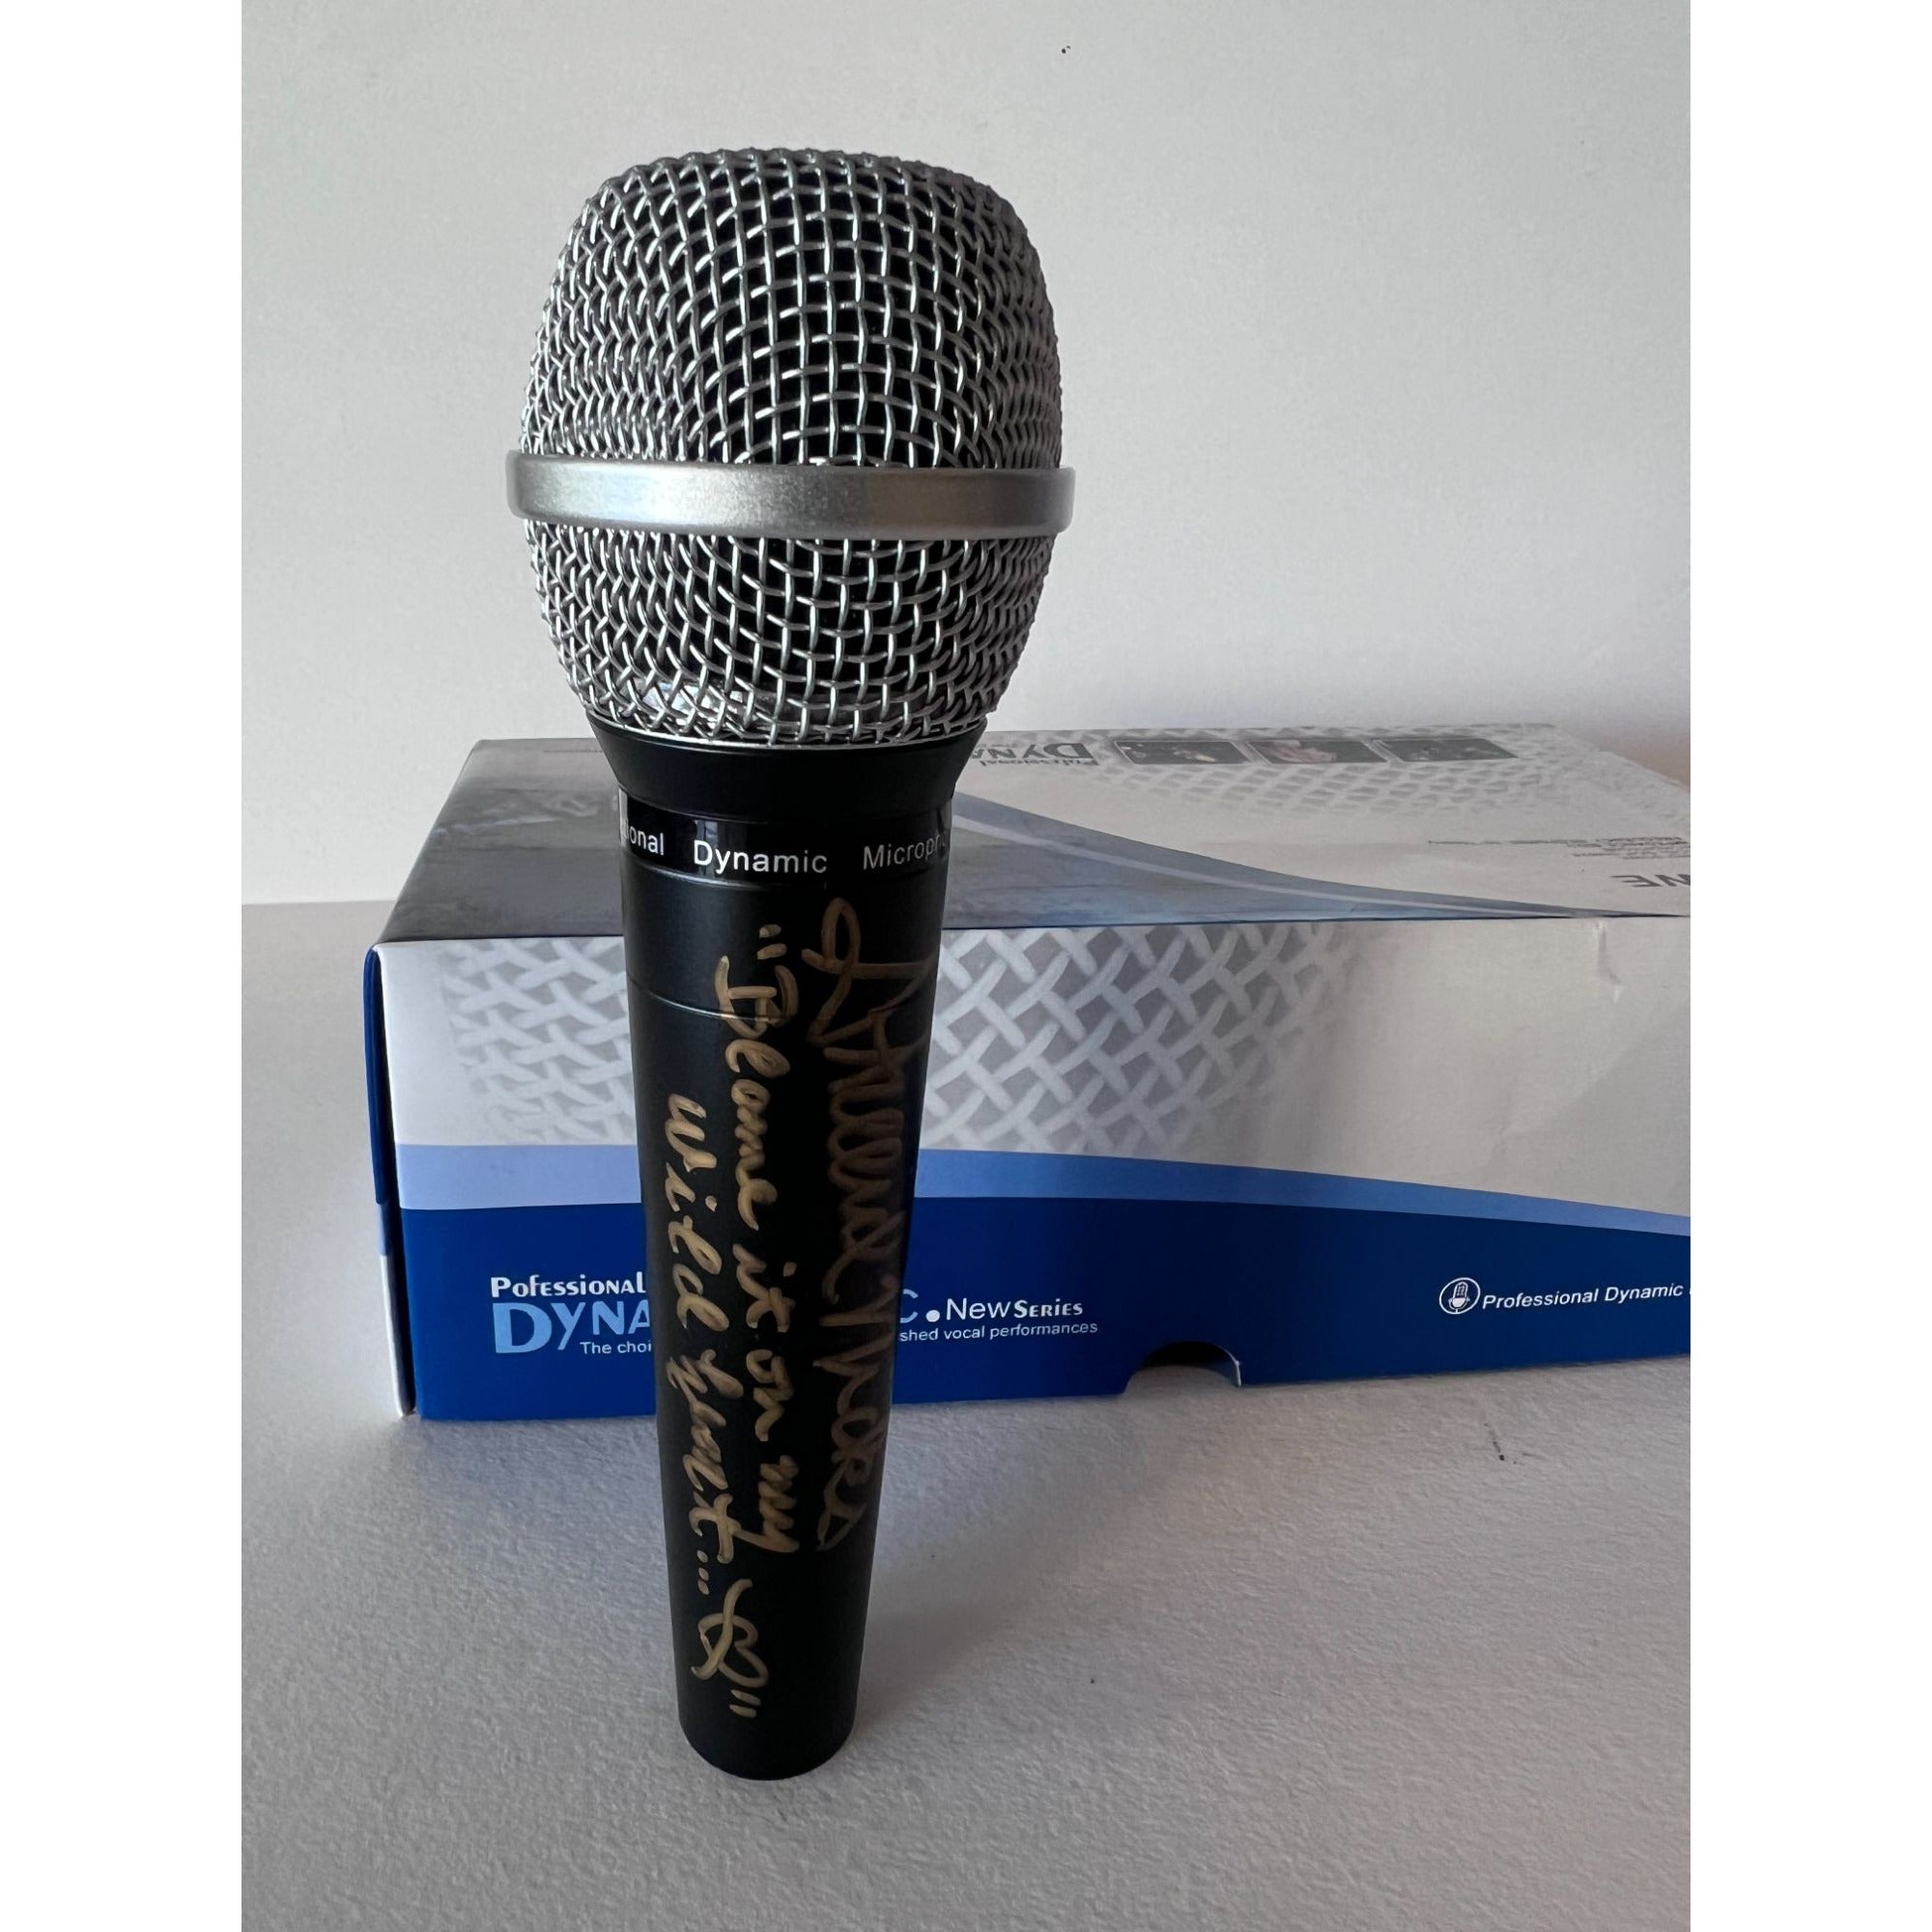 Stevie Nicks Fleetwood Mac microphone signed with proof